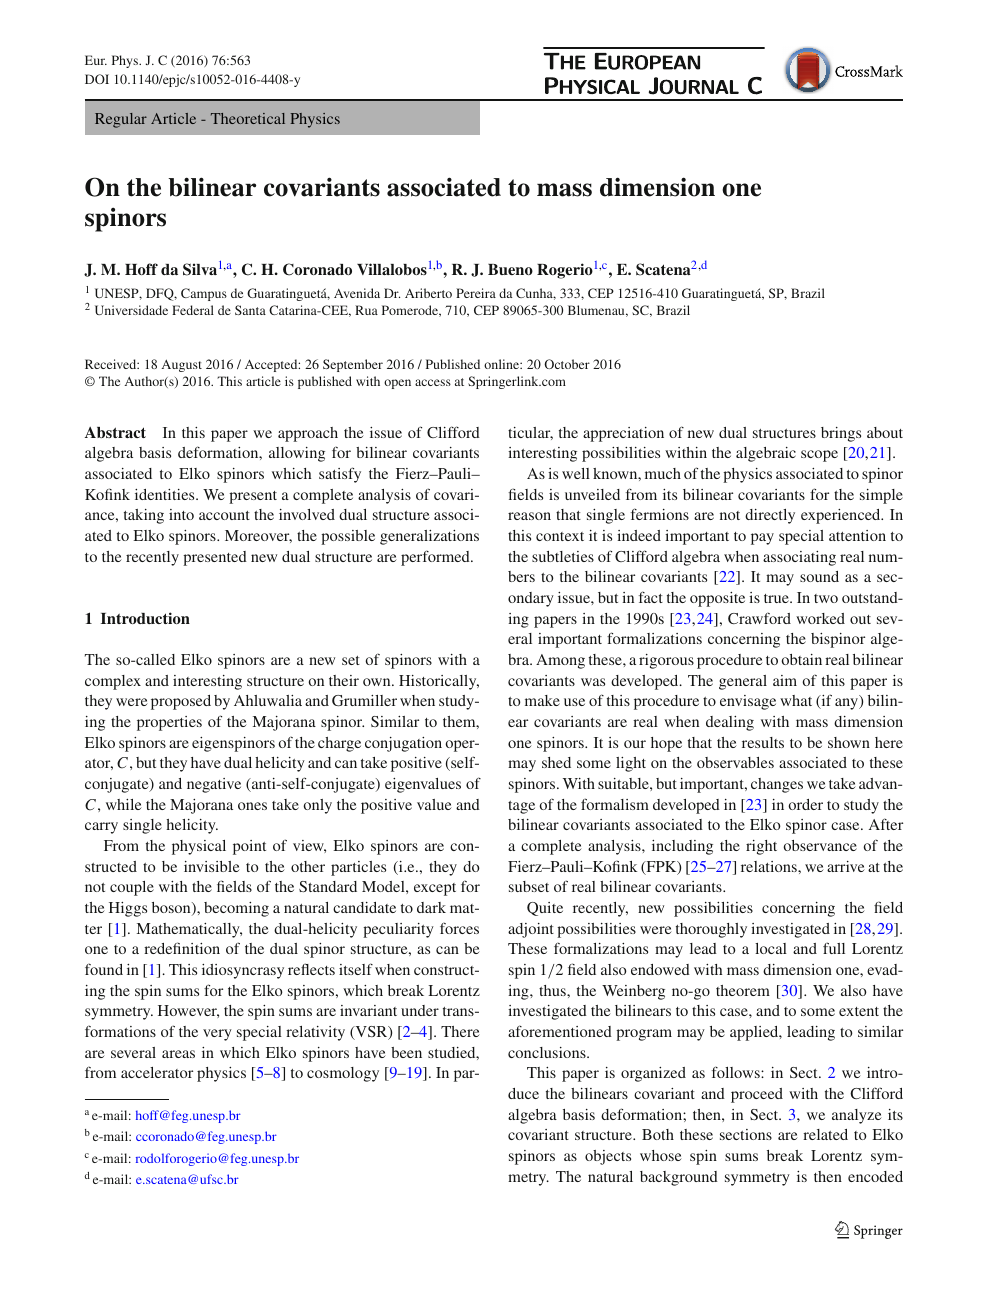 On The Bilinear Covariants Associated To Mass Dimension One Spinors Topic Of Research Paper In Physical Sciences Download Scholarly Article Pdf And Read For Free On Cyberleninka Open Science Hub